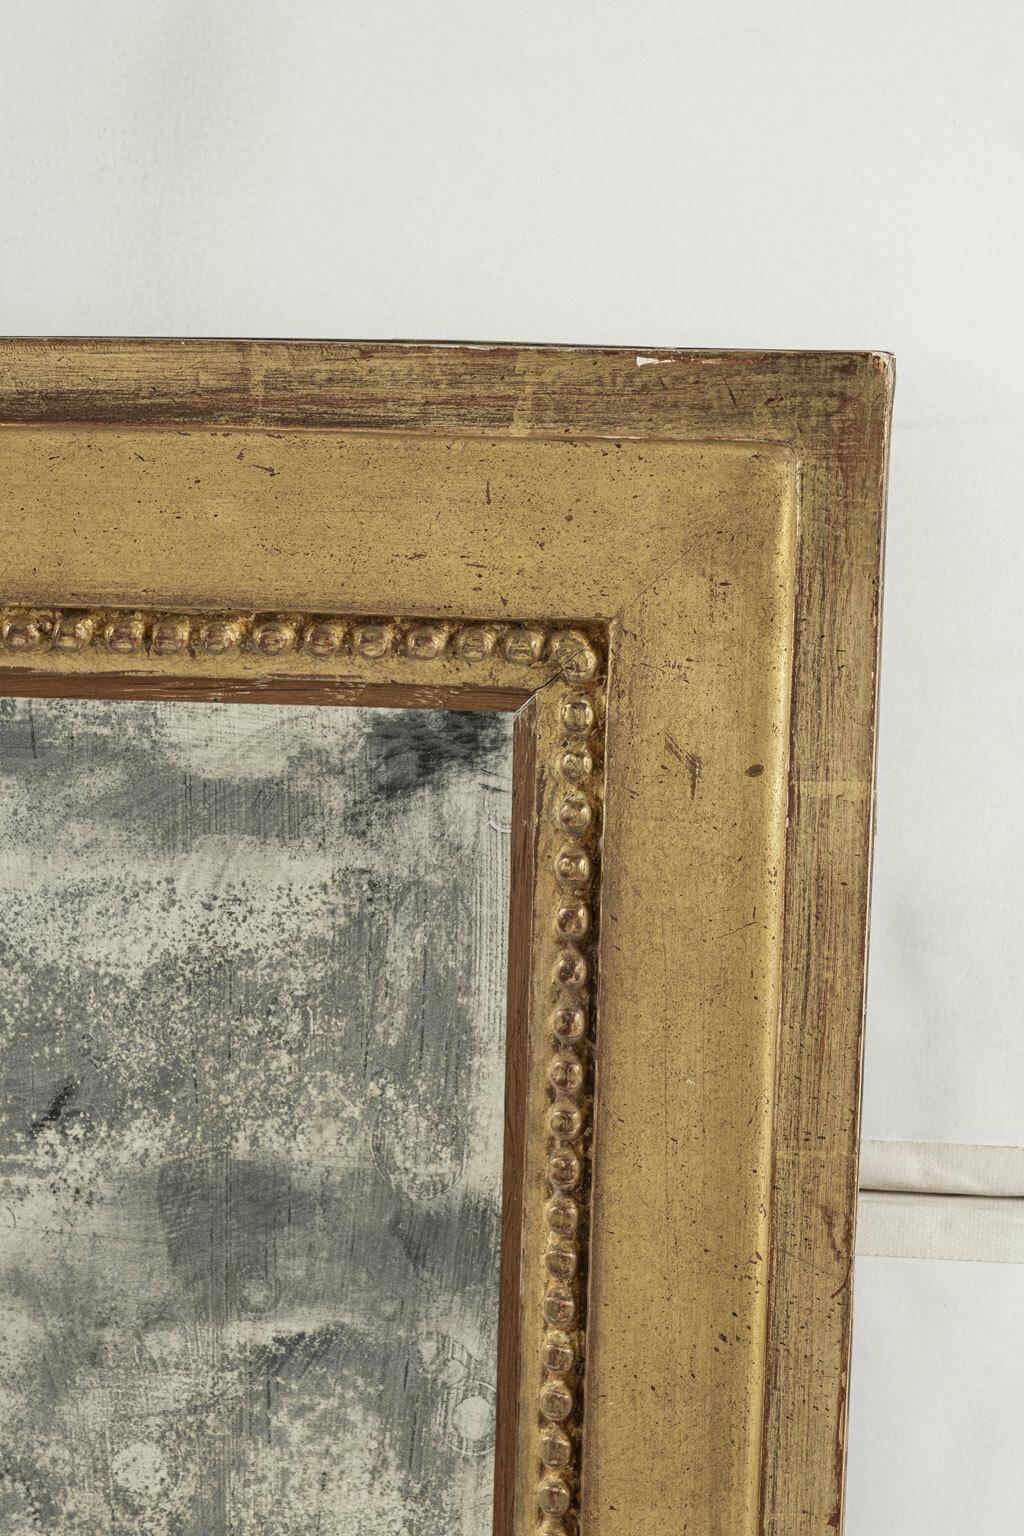 Georgian mirror within beaded giltwood frame: hand-carved giltwood frame surrounding early, or original, mirror. Circa 1780-1810, England.

Note: Regional differences in humidity and climate during shipping may cause antique and vintage wood to